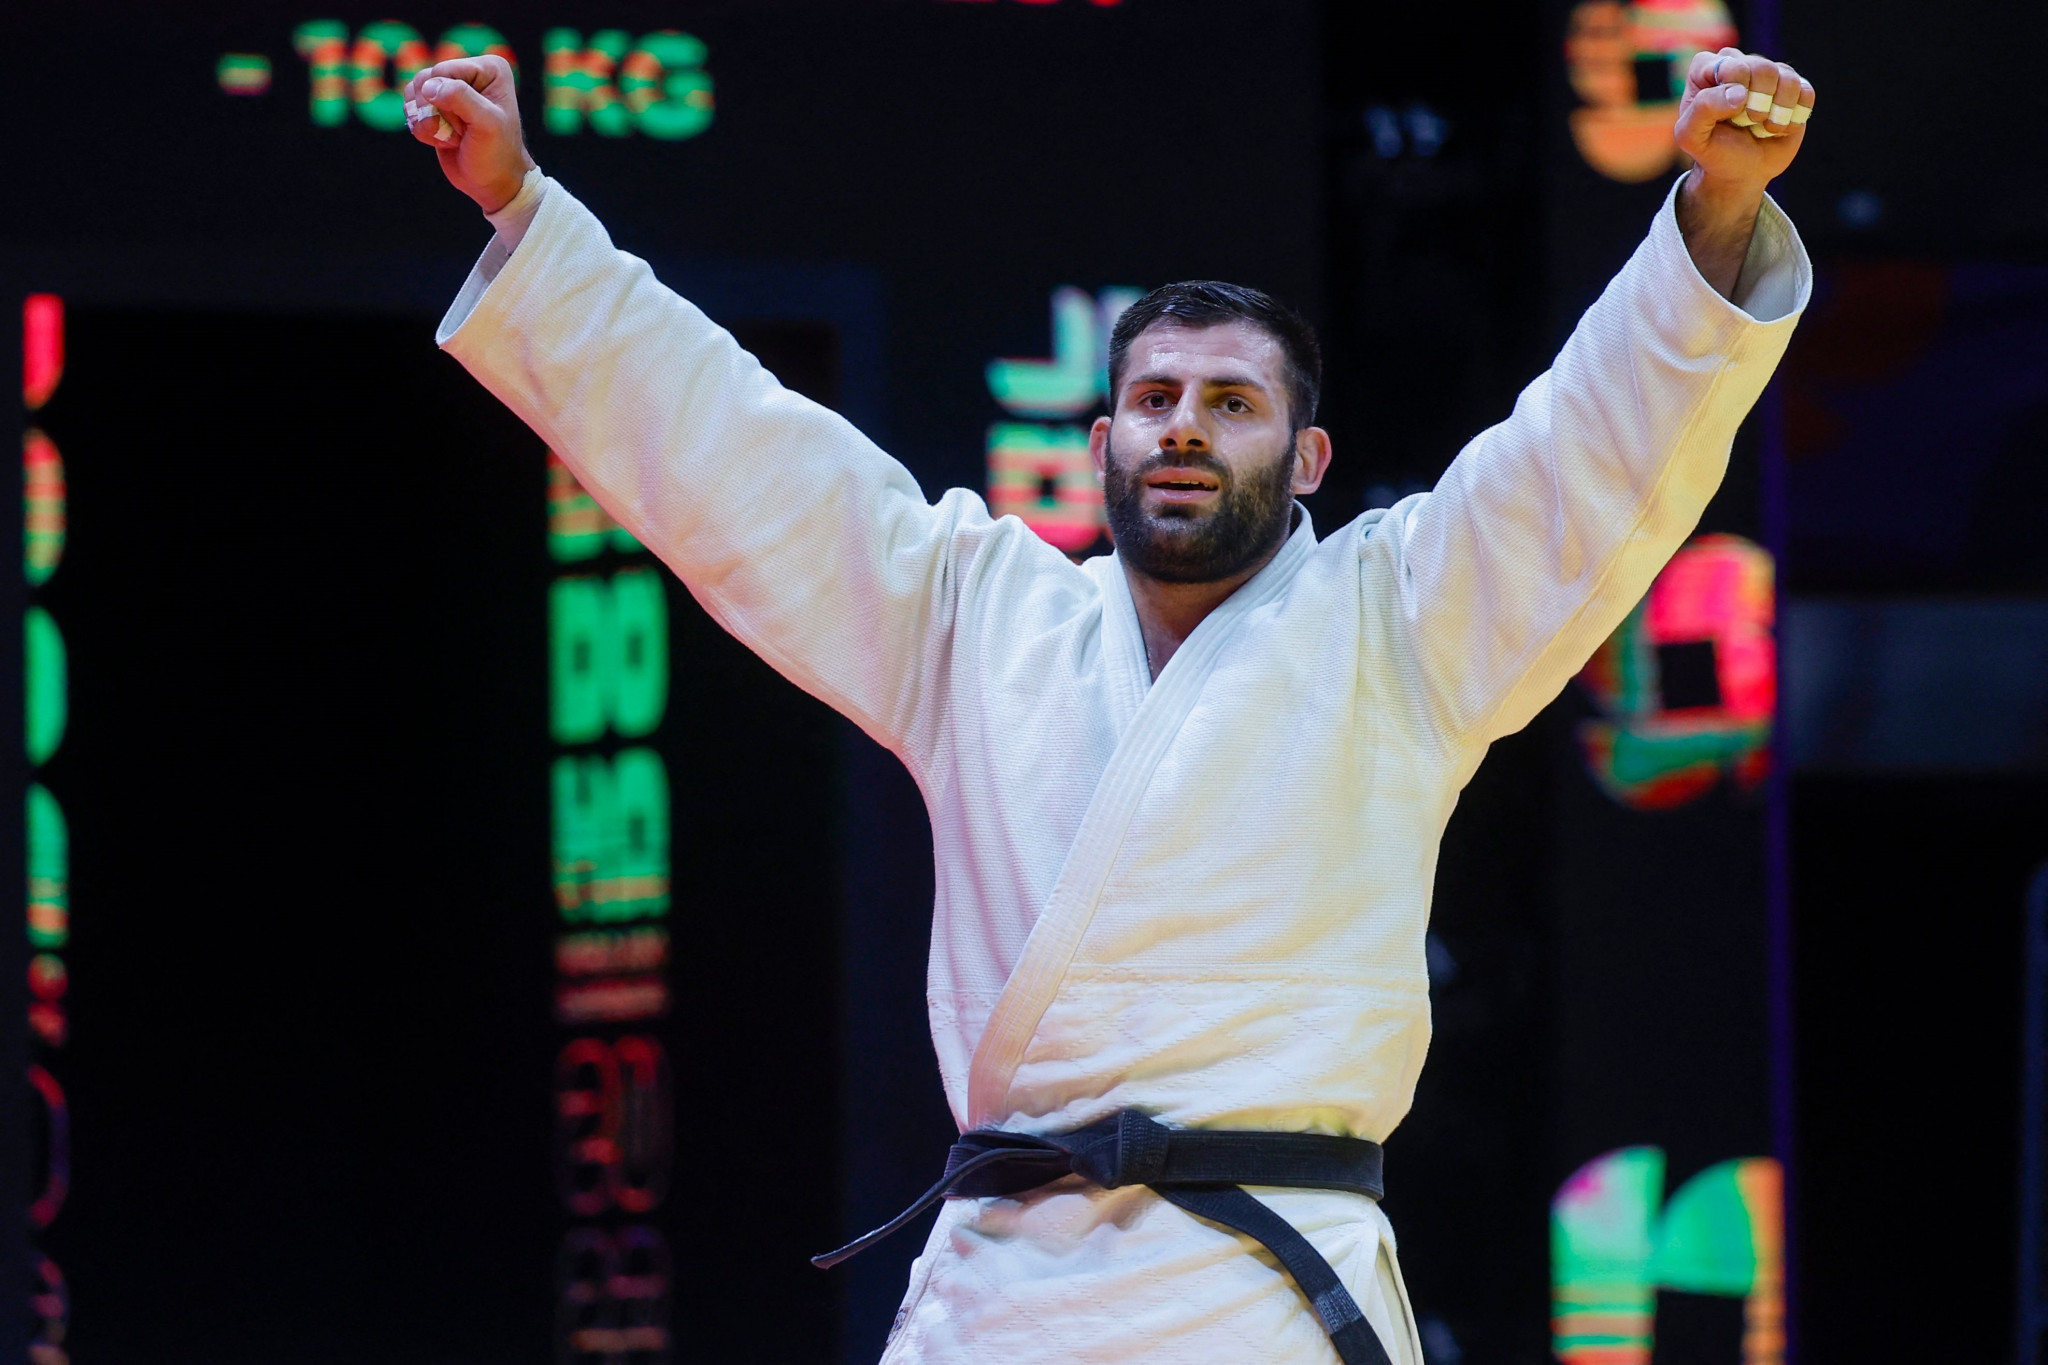 The Russian Judo Federation said individual neutral athlete Arman Adamian had won gold for 